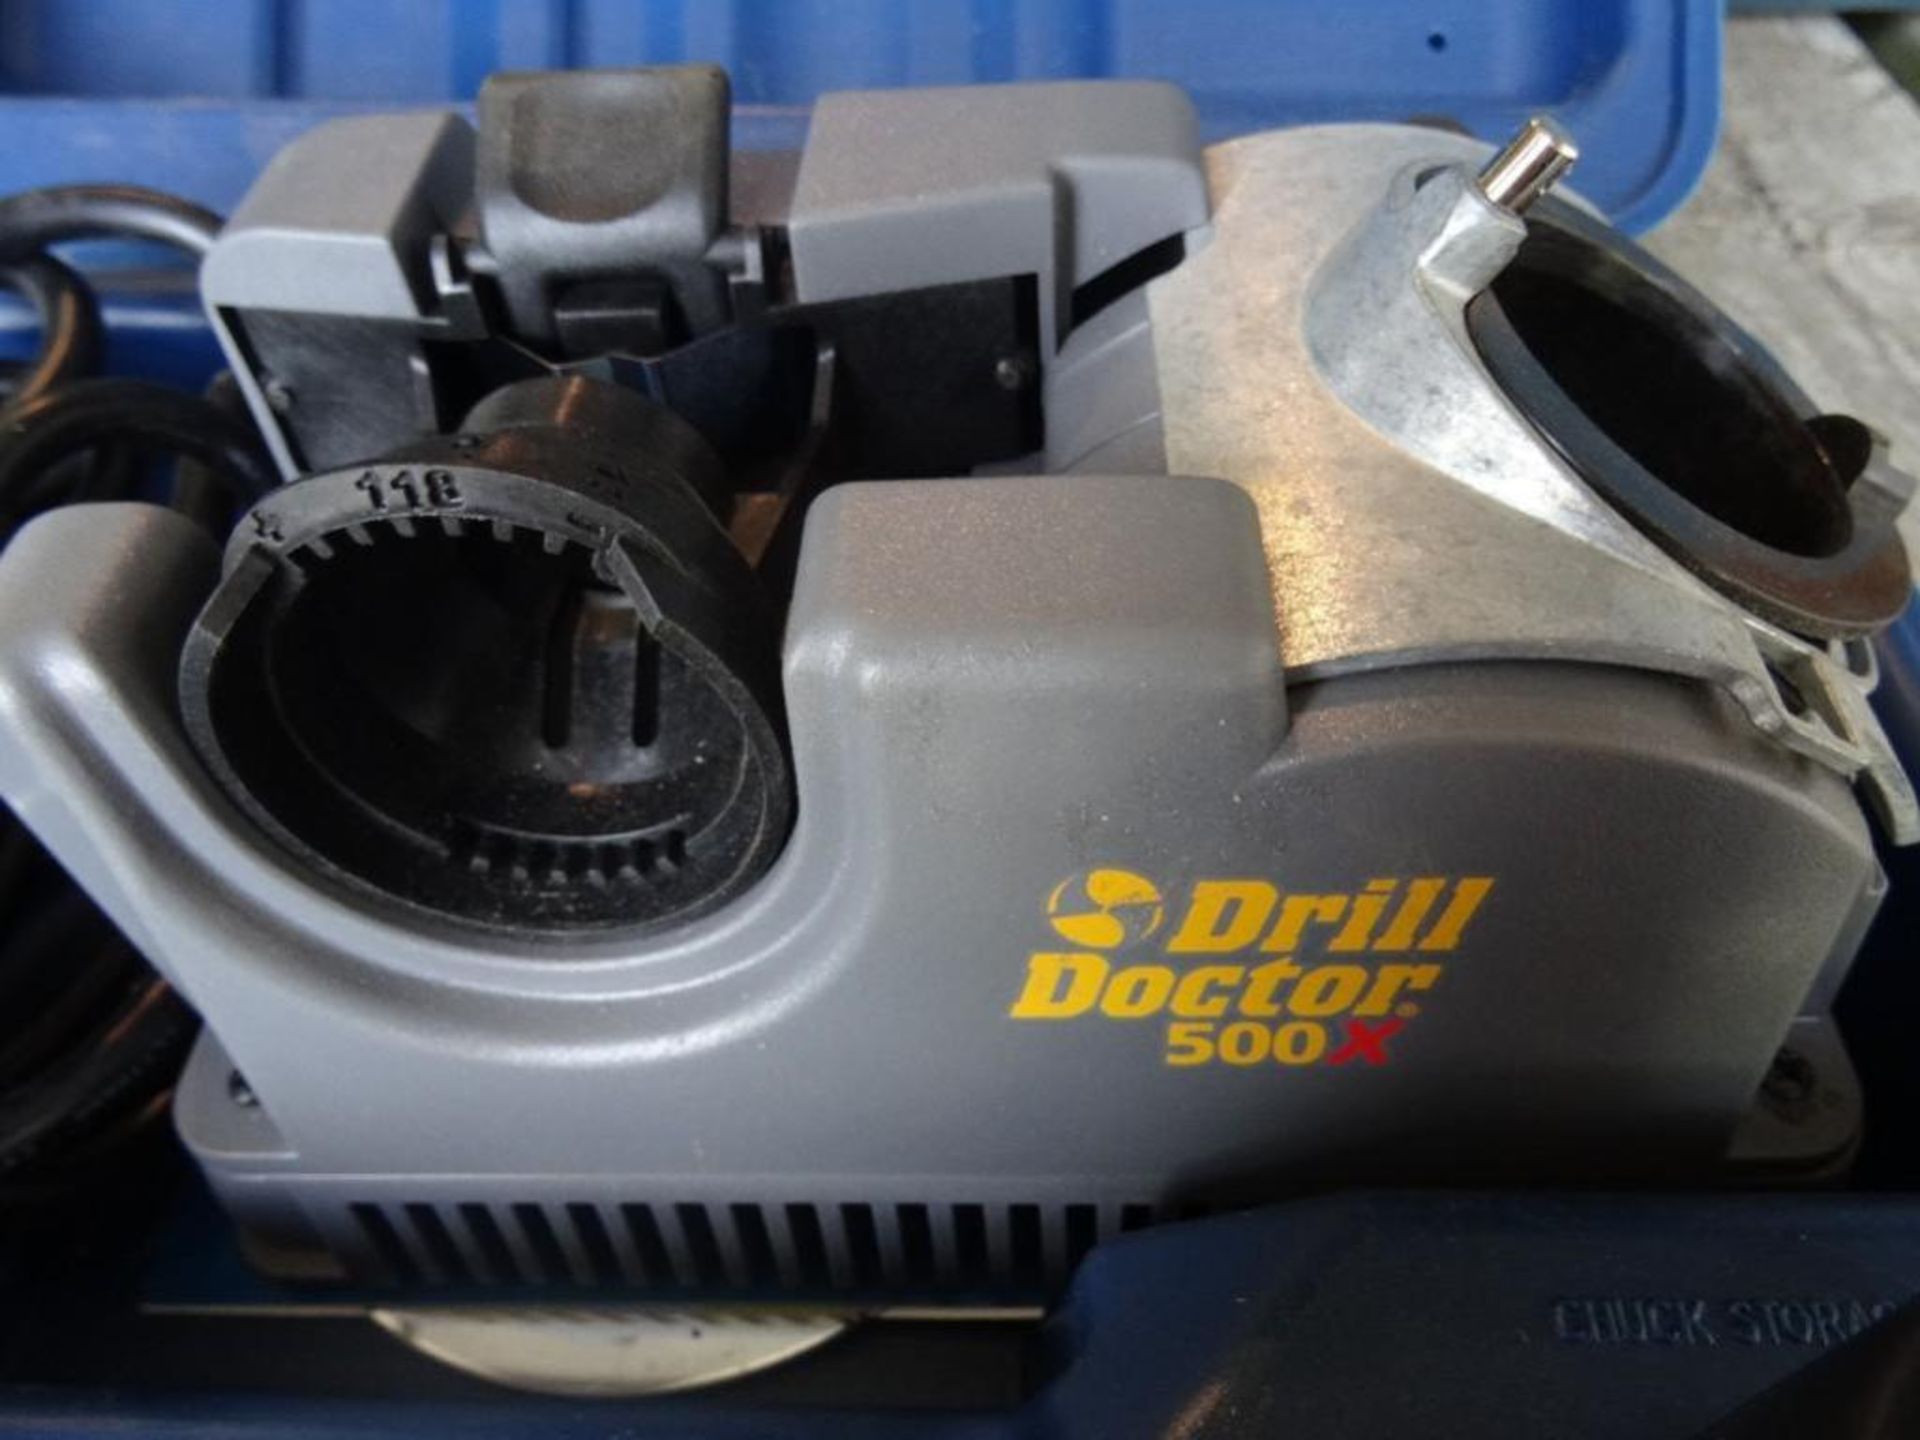 Drill Doctor 500X-The Drill Bit Sharpener - Image 2 of 2